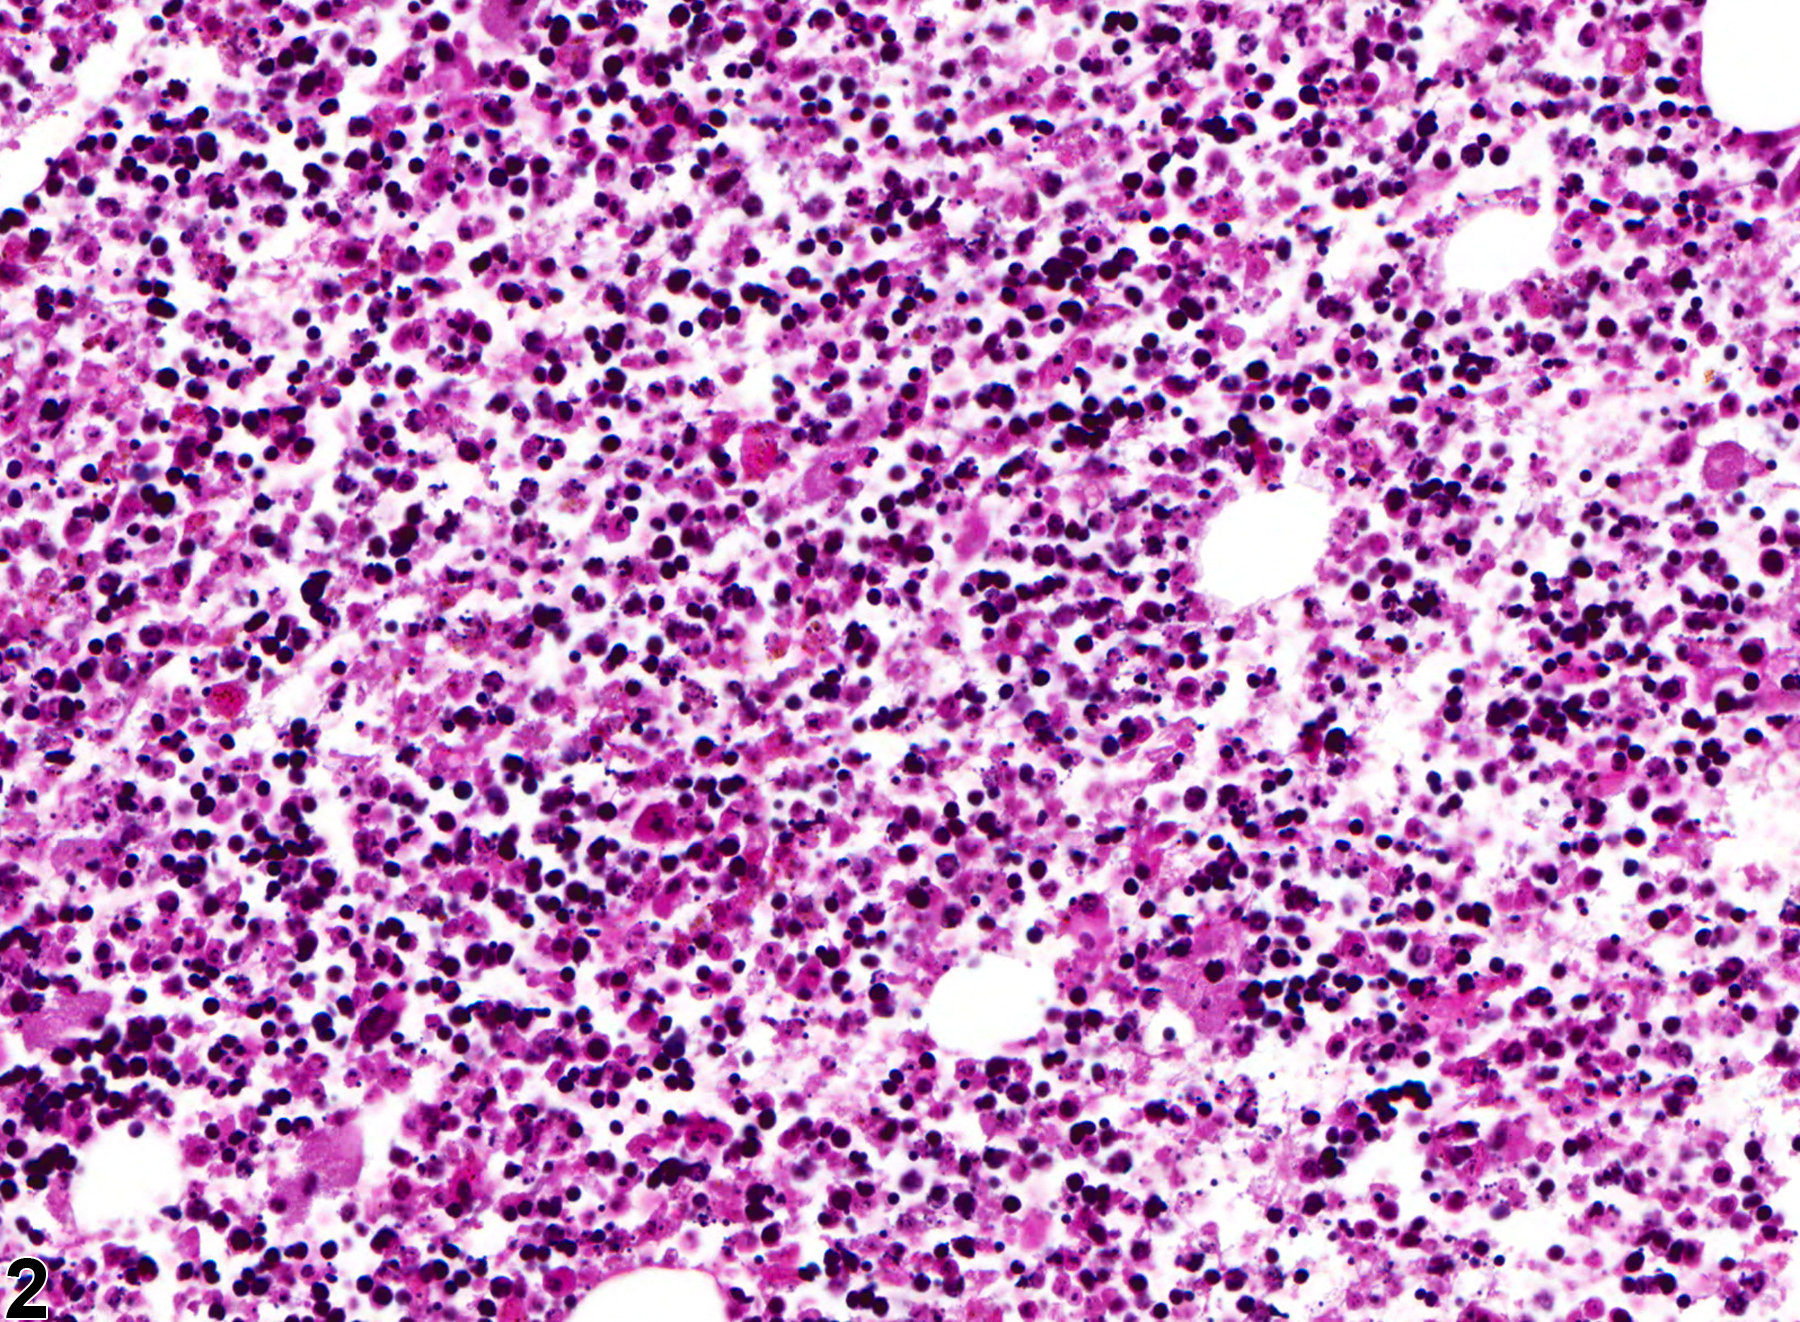 Image of necrosis in the bone marrow from a female B6C3F1 mouse in a chronic study